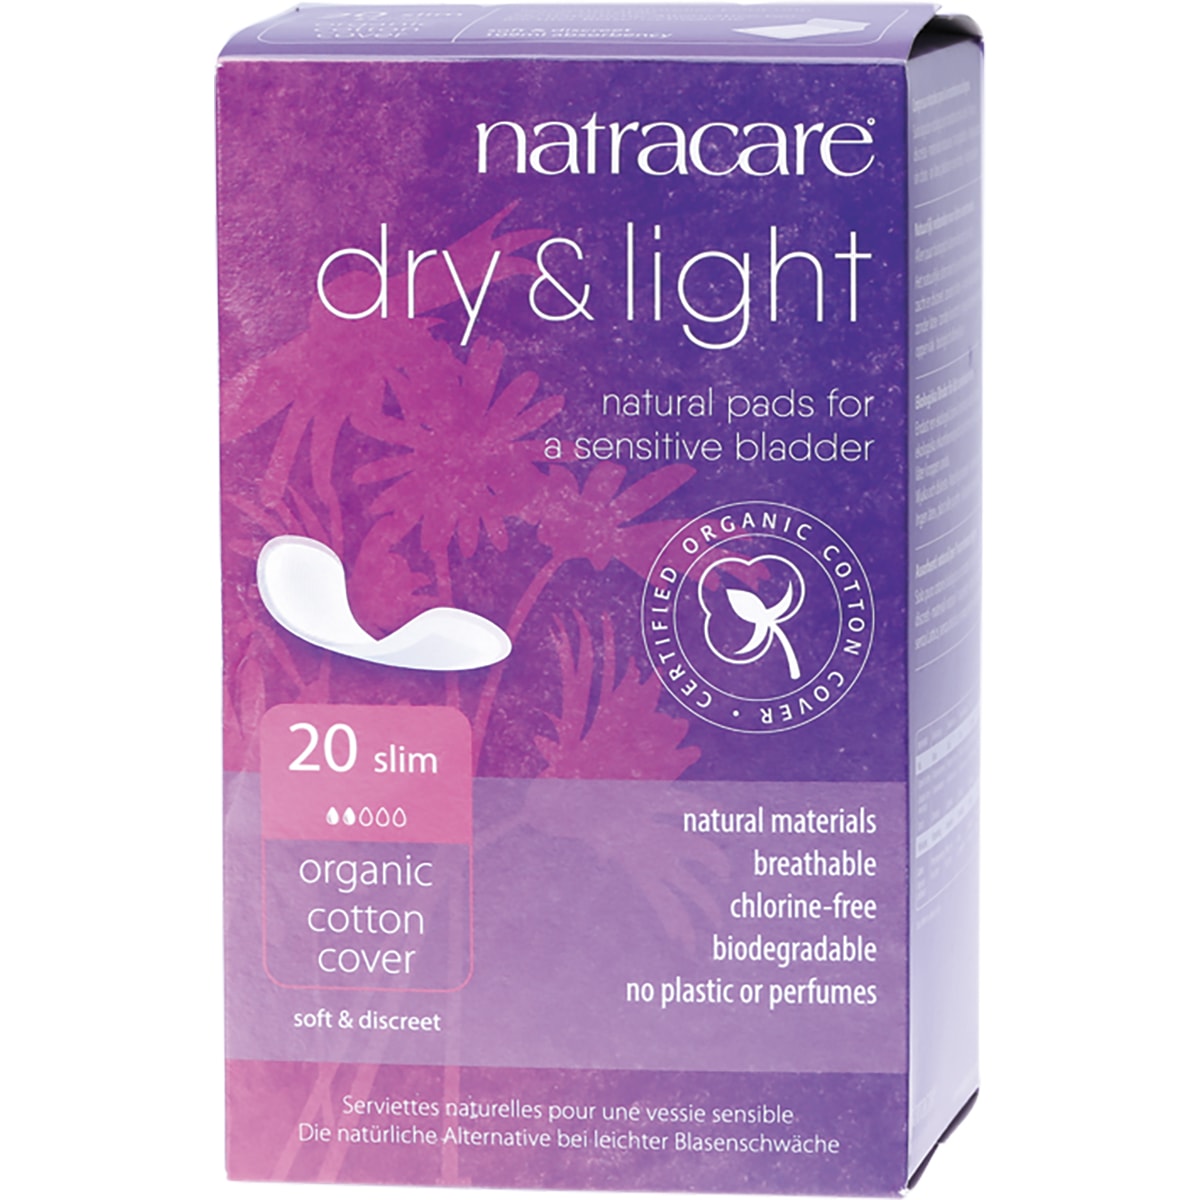 Natracare Dry & Light Incontinence Pads